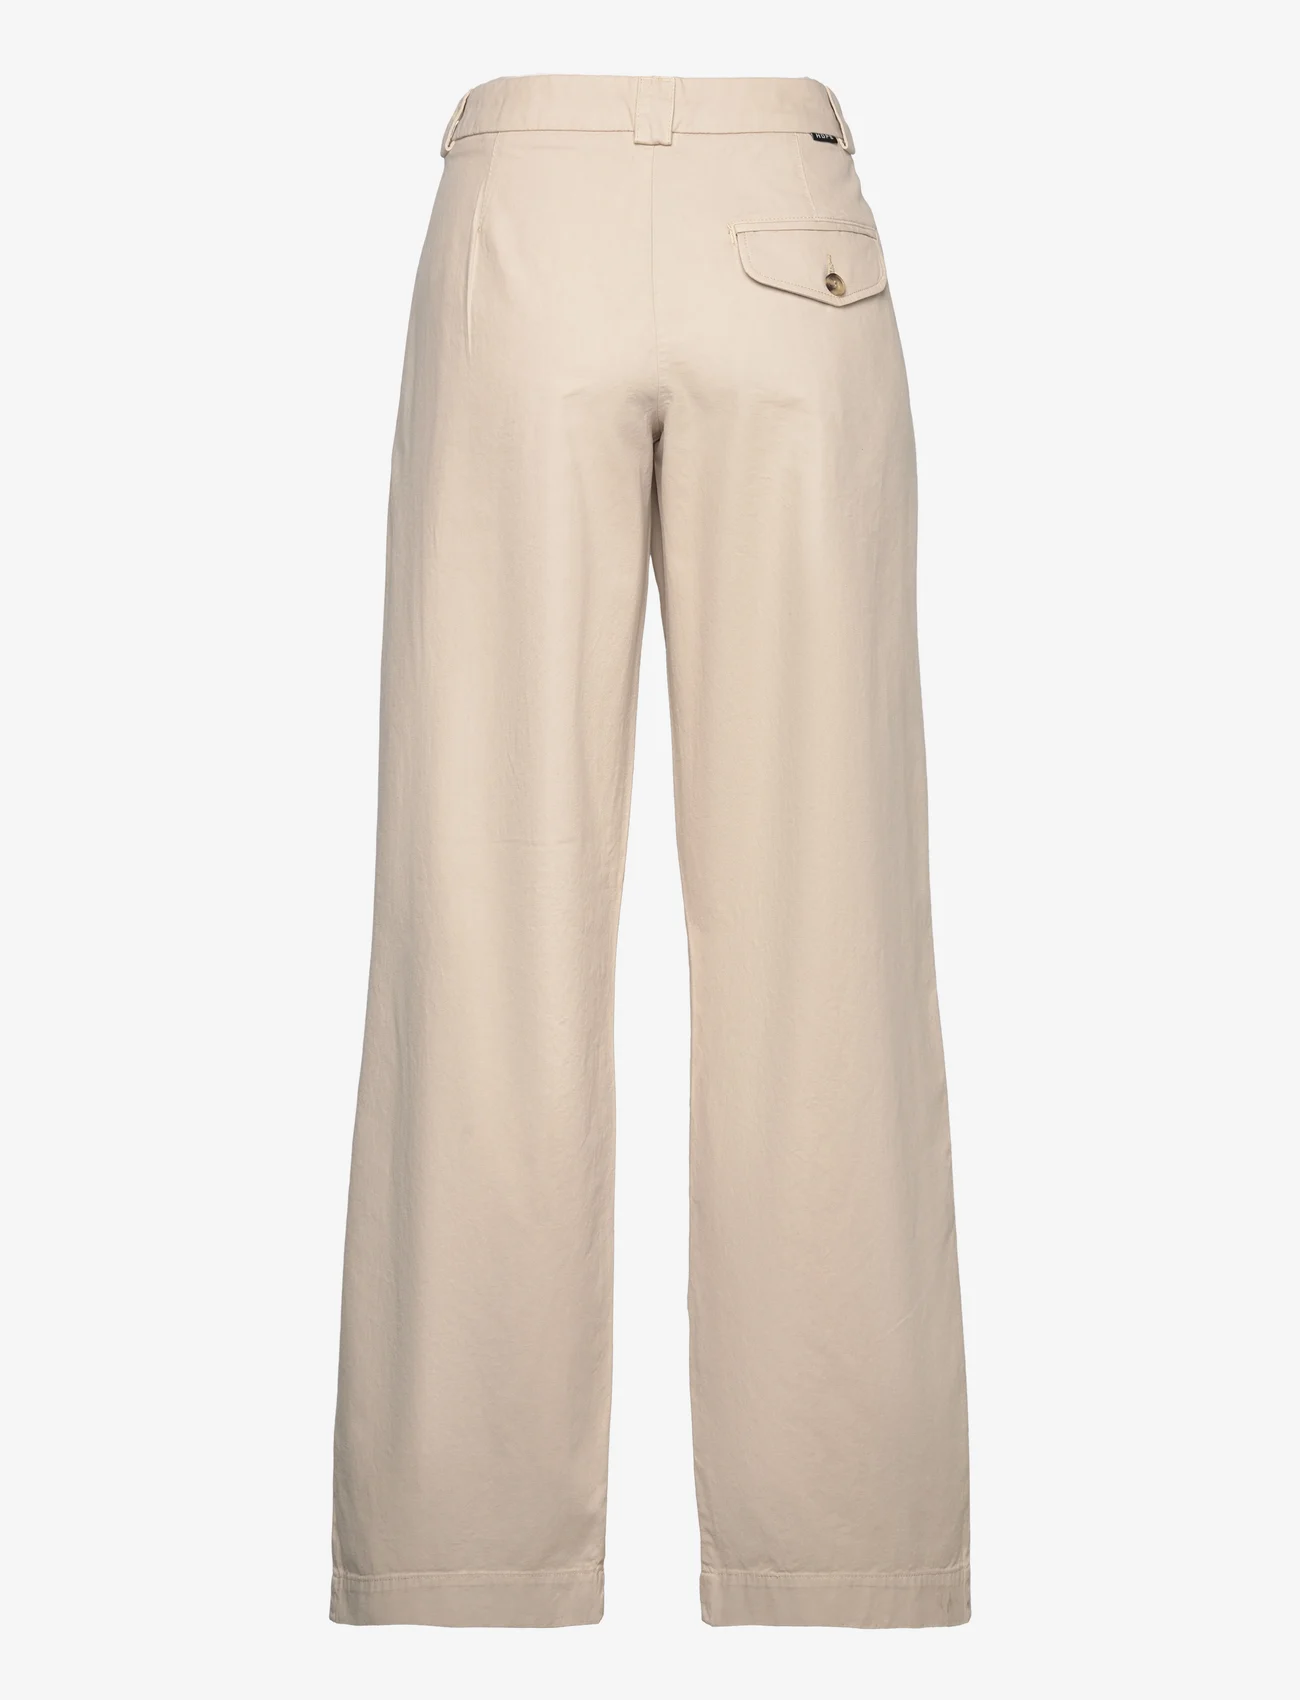 Hope - Relaxed Pleated Chinos - chinot - light beige - 1